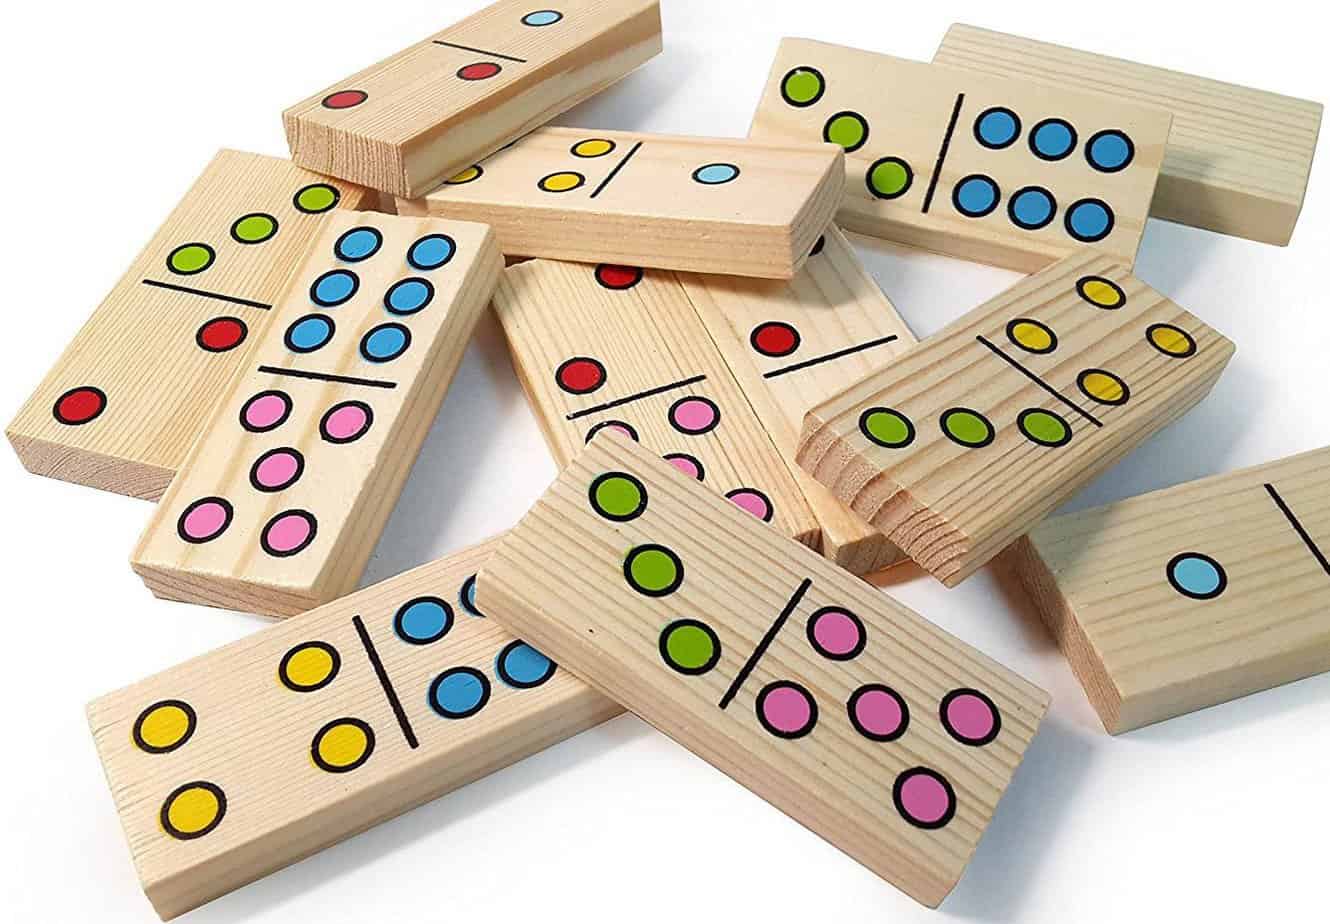 Dominoes - fun ways to practice math at home